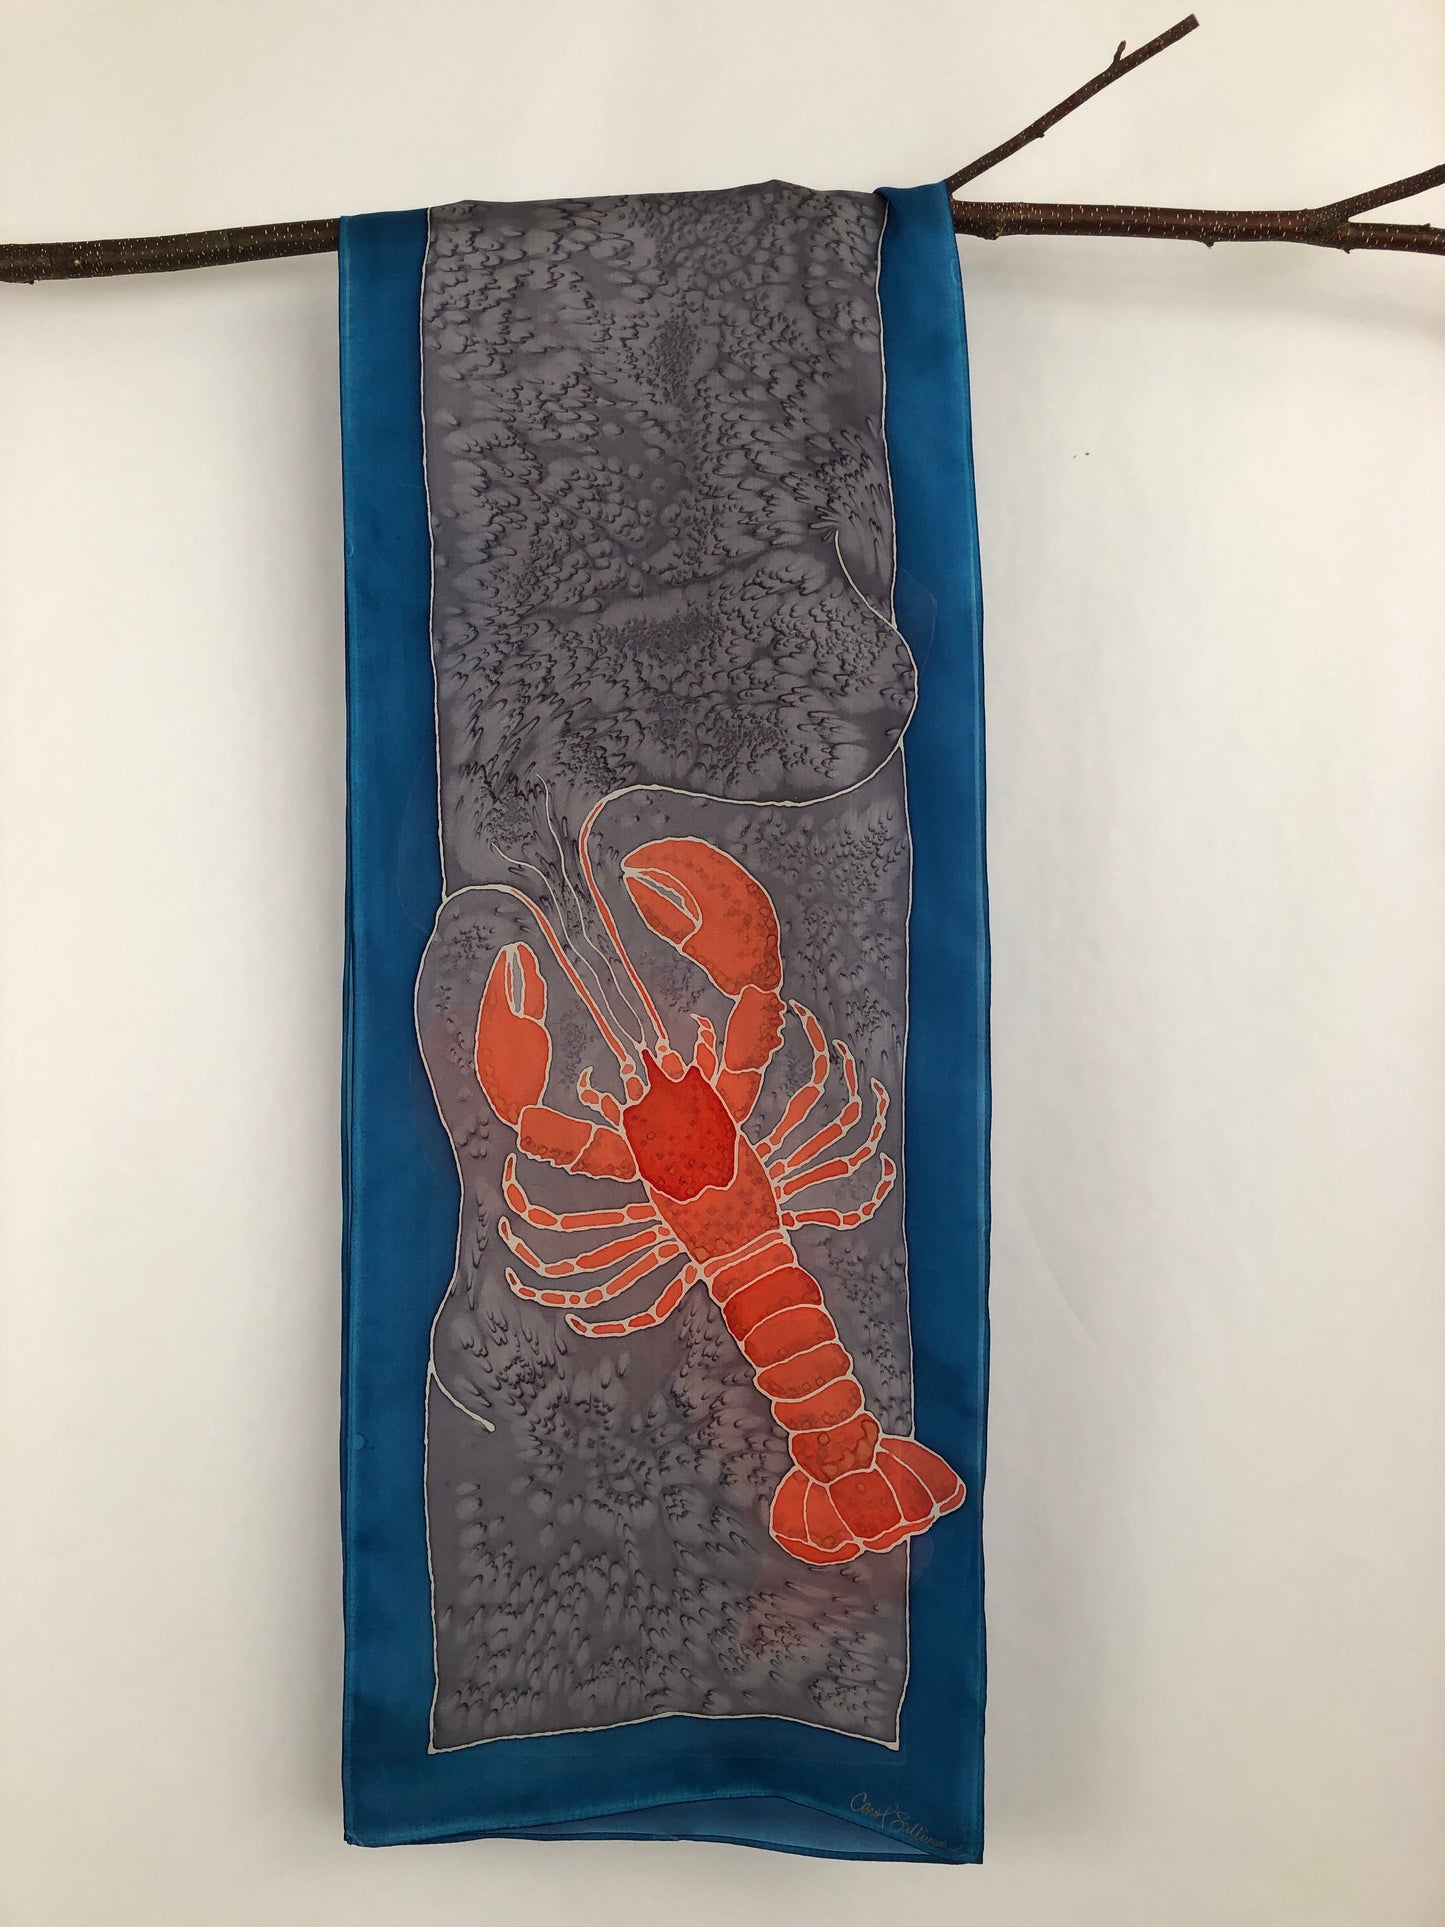 "Love Maine Lobster v1" - Hand-dyed Silk Scarf - $130